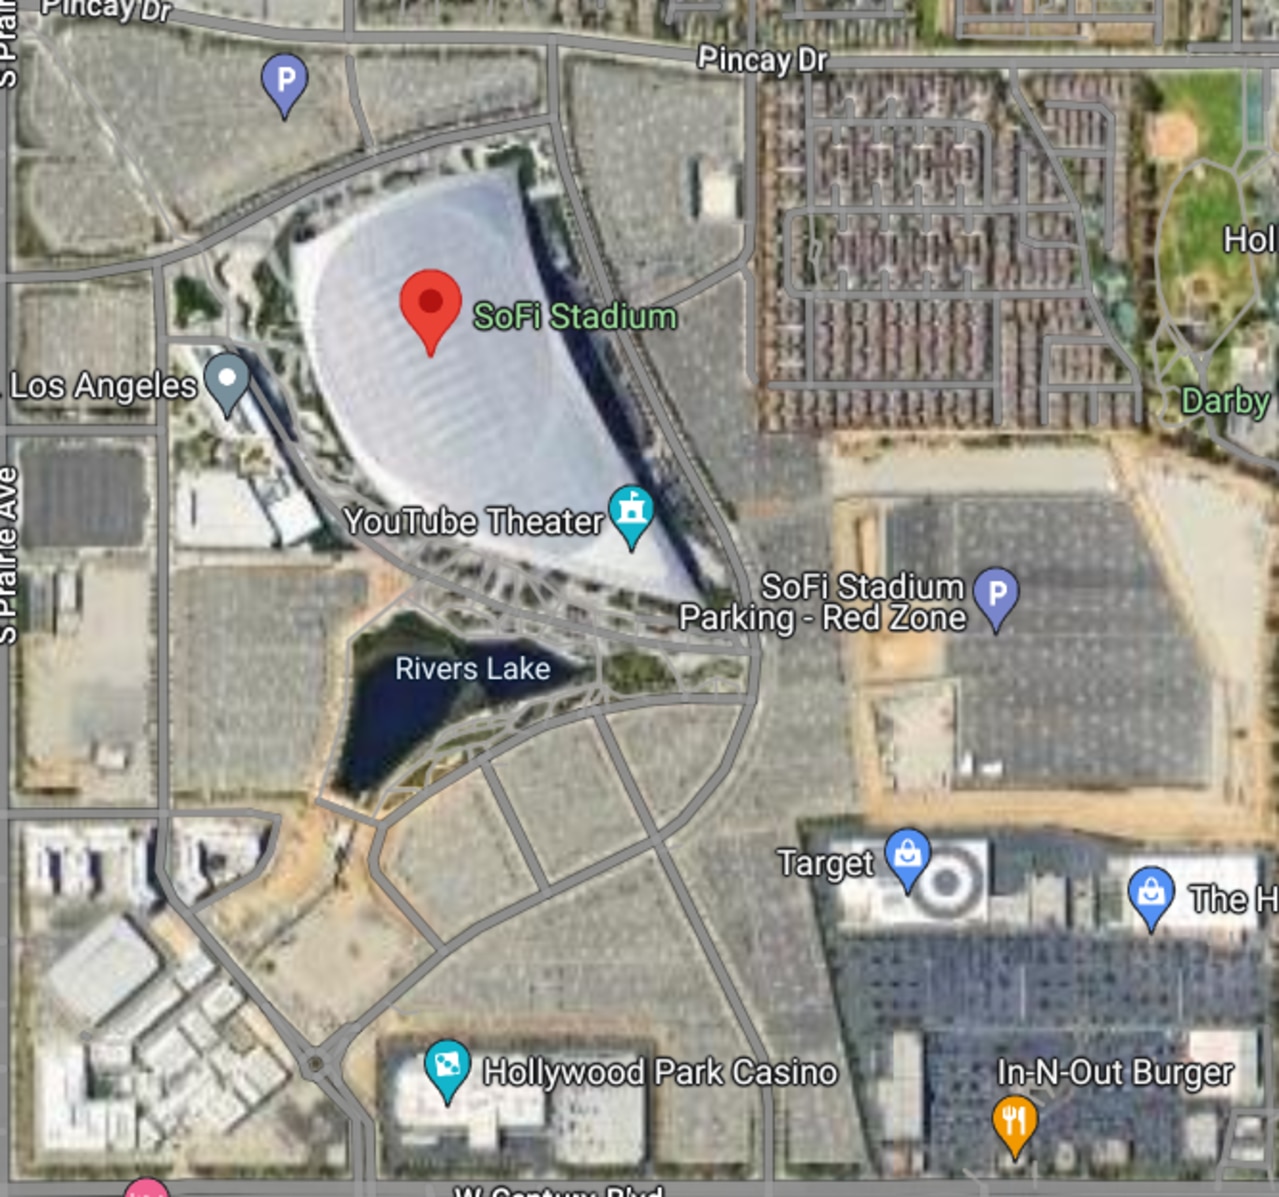 Good luck finding your car after a visit to California’s SoFi Stadium.